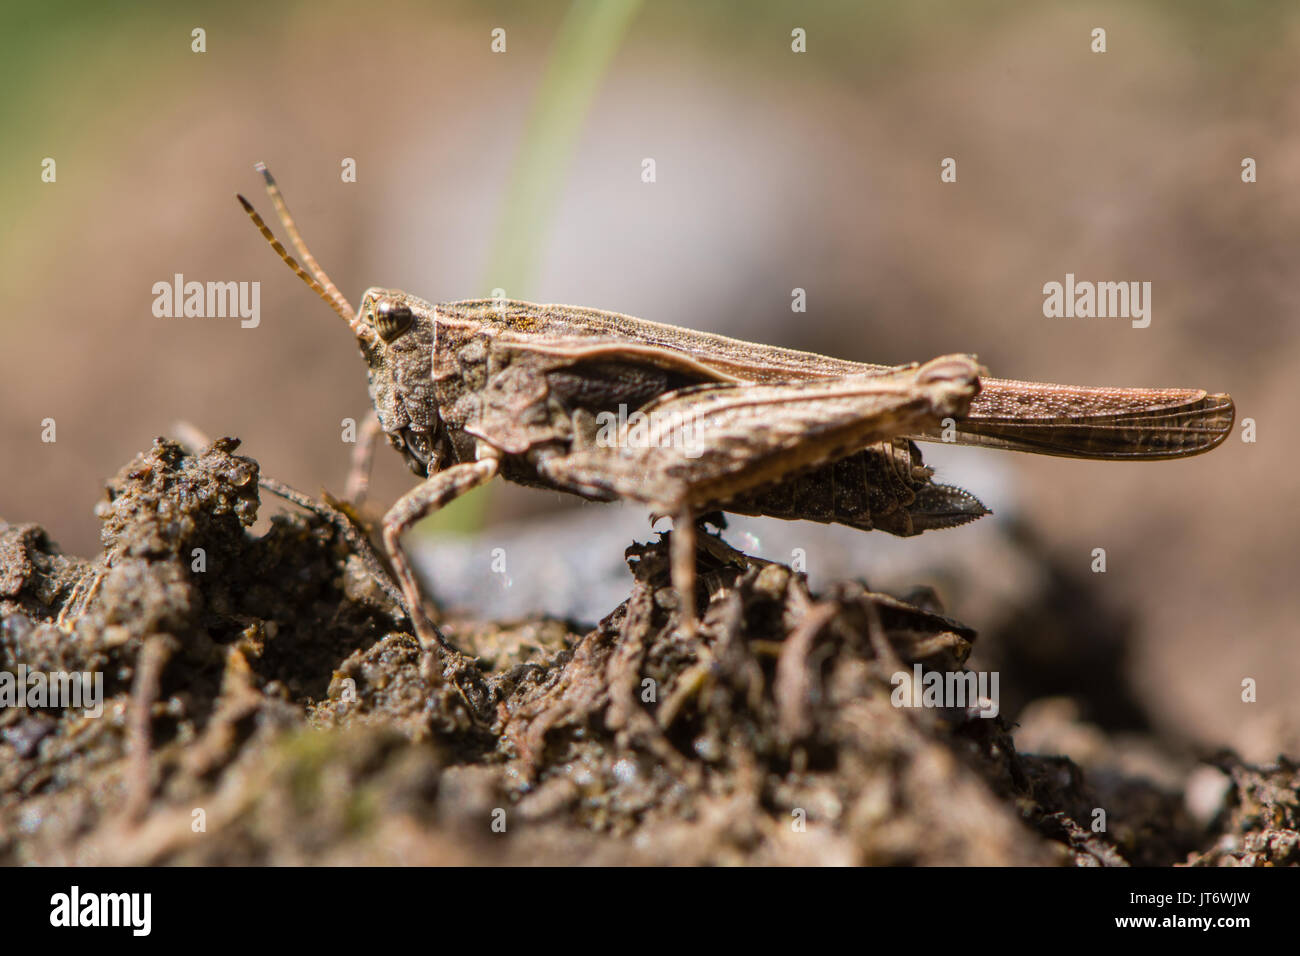 Slender groundhopper (Tetrix subulata) adult profile. Grasshopper-like insect in the order Orthoptera with wings extending beyond abdomen Stock Photo